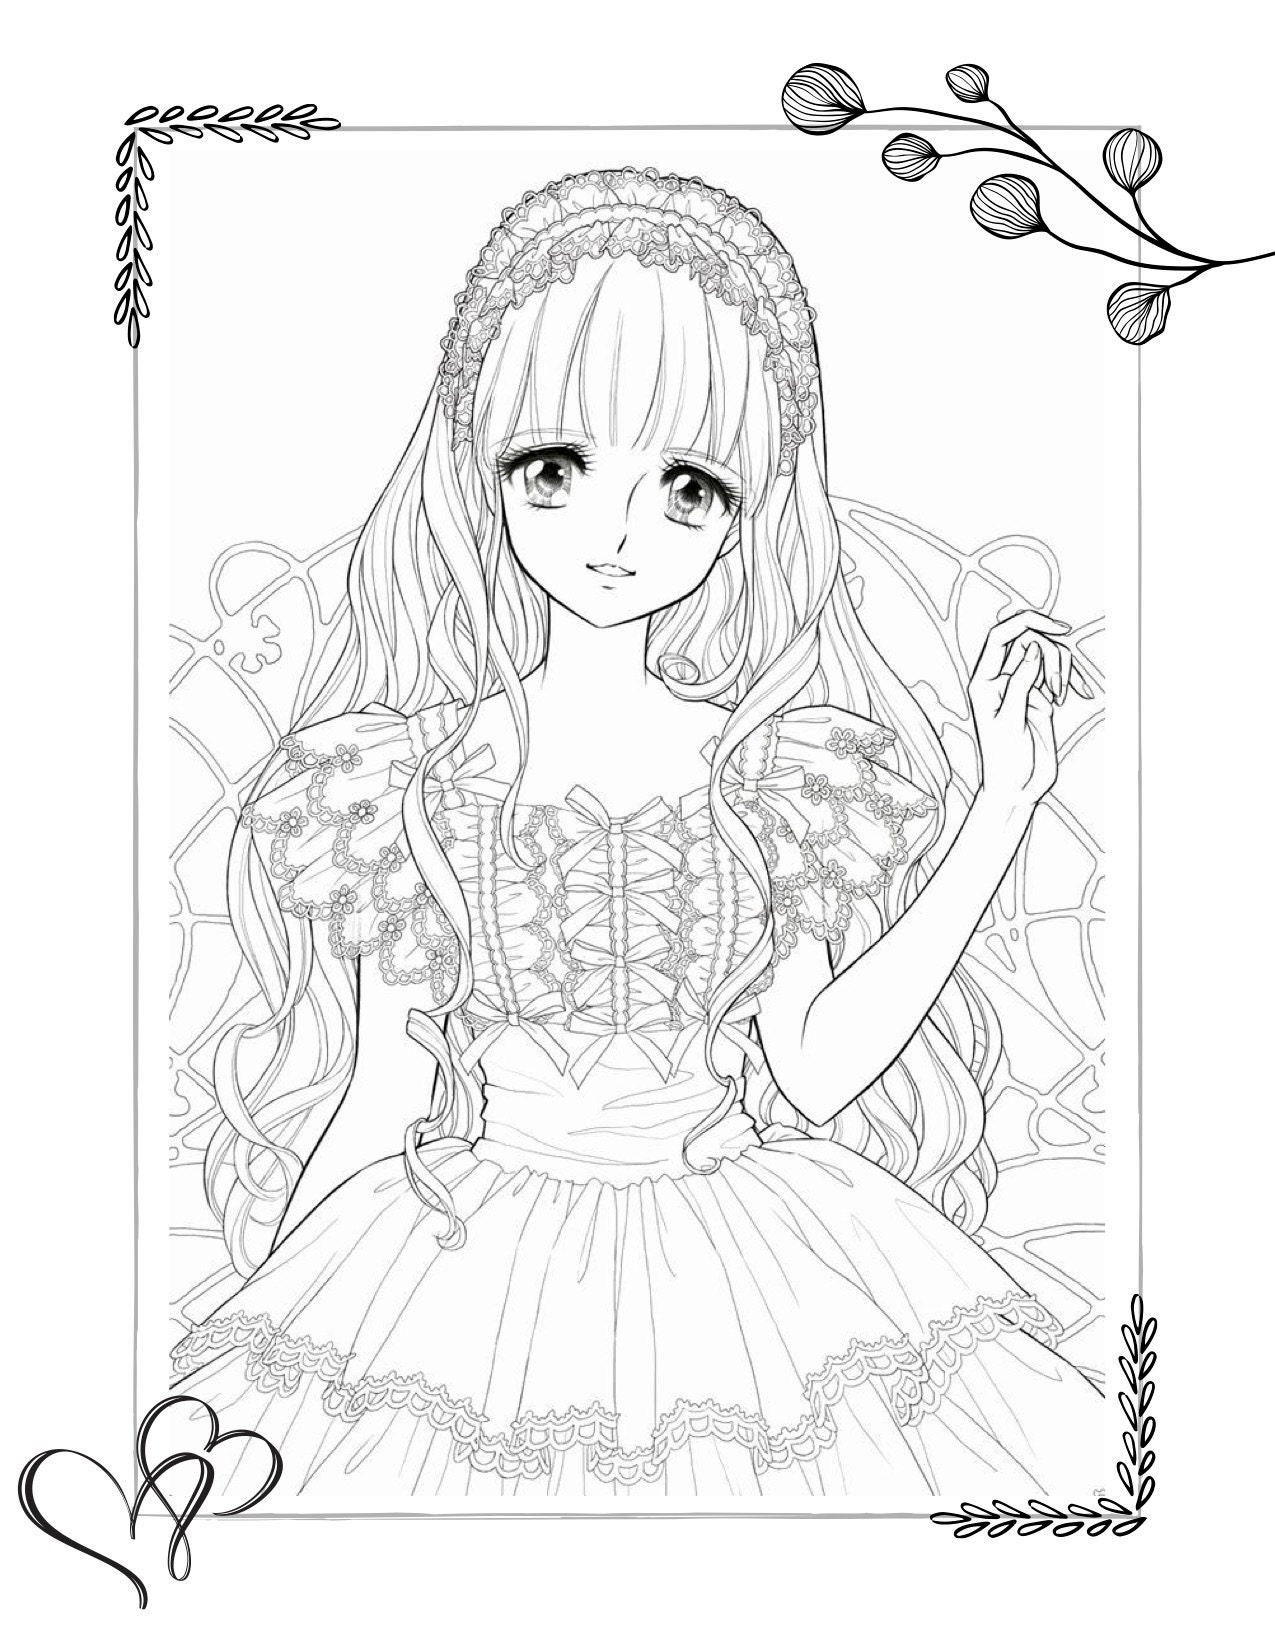 Digital Coloring Page   Aoki Bundle, 20 Printable Coloring Pages, PDF  Coloring Book, Anime, Japanese, Cute, Girl, Instant Download